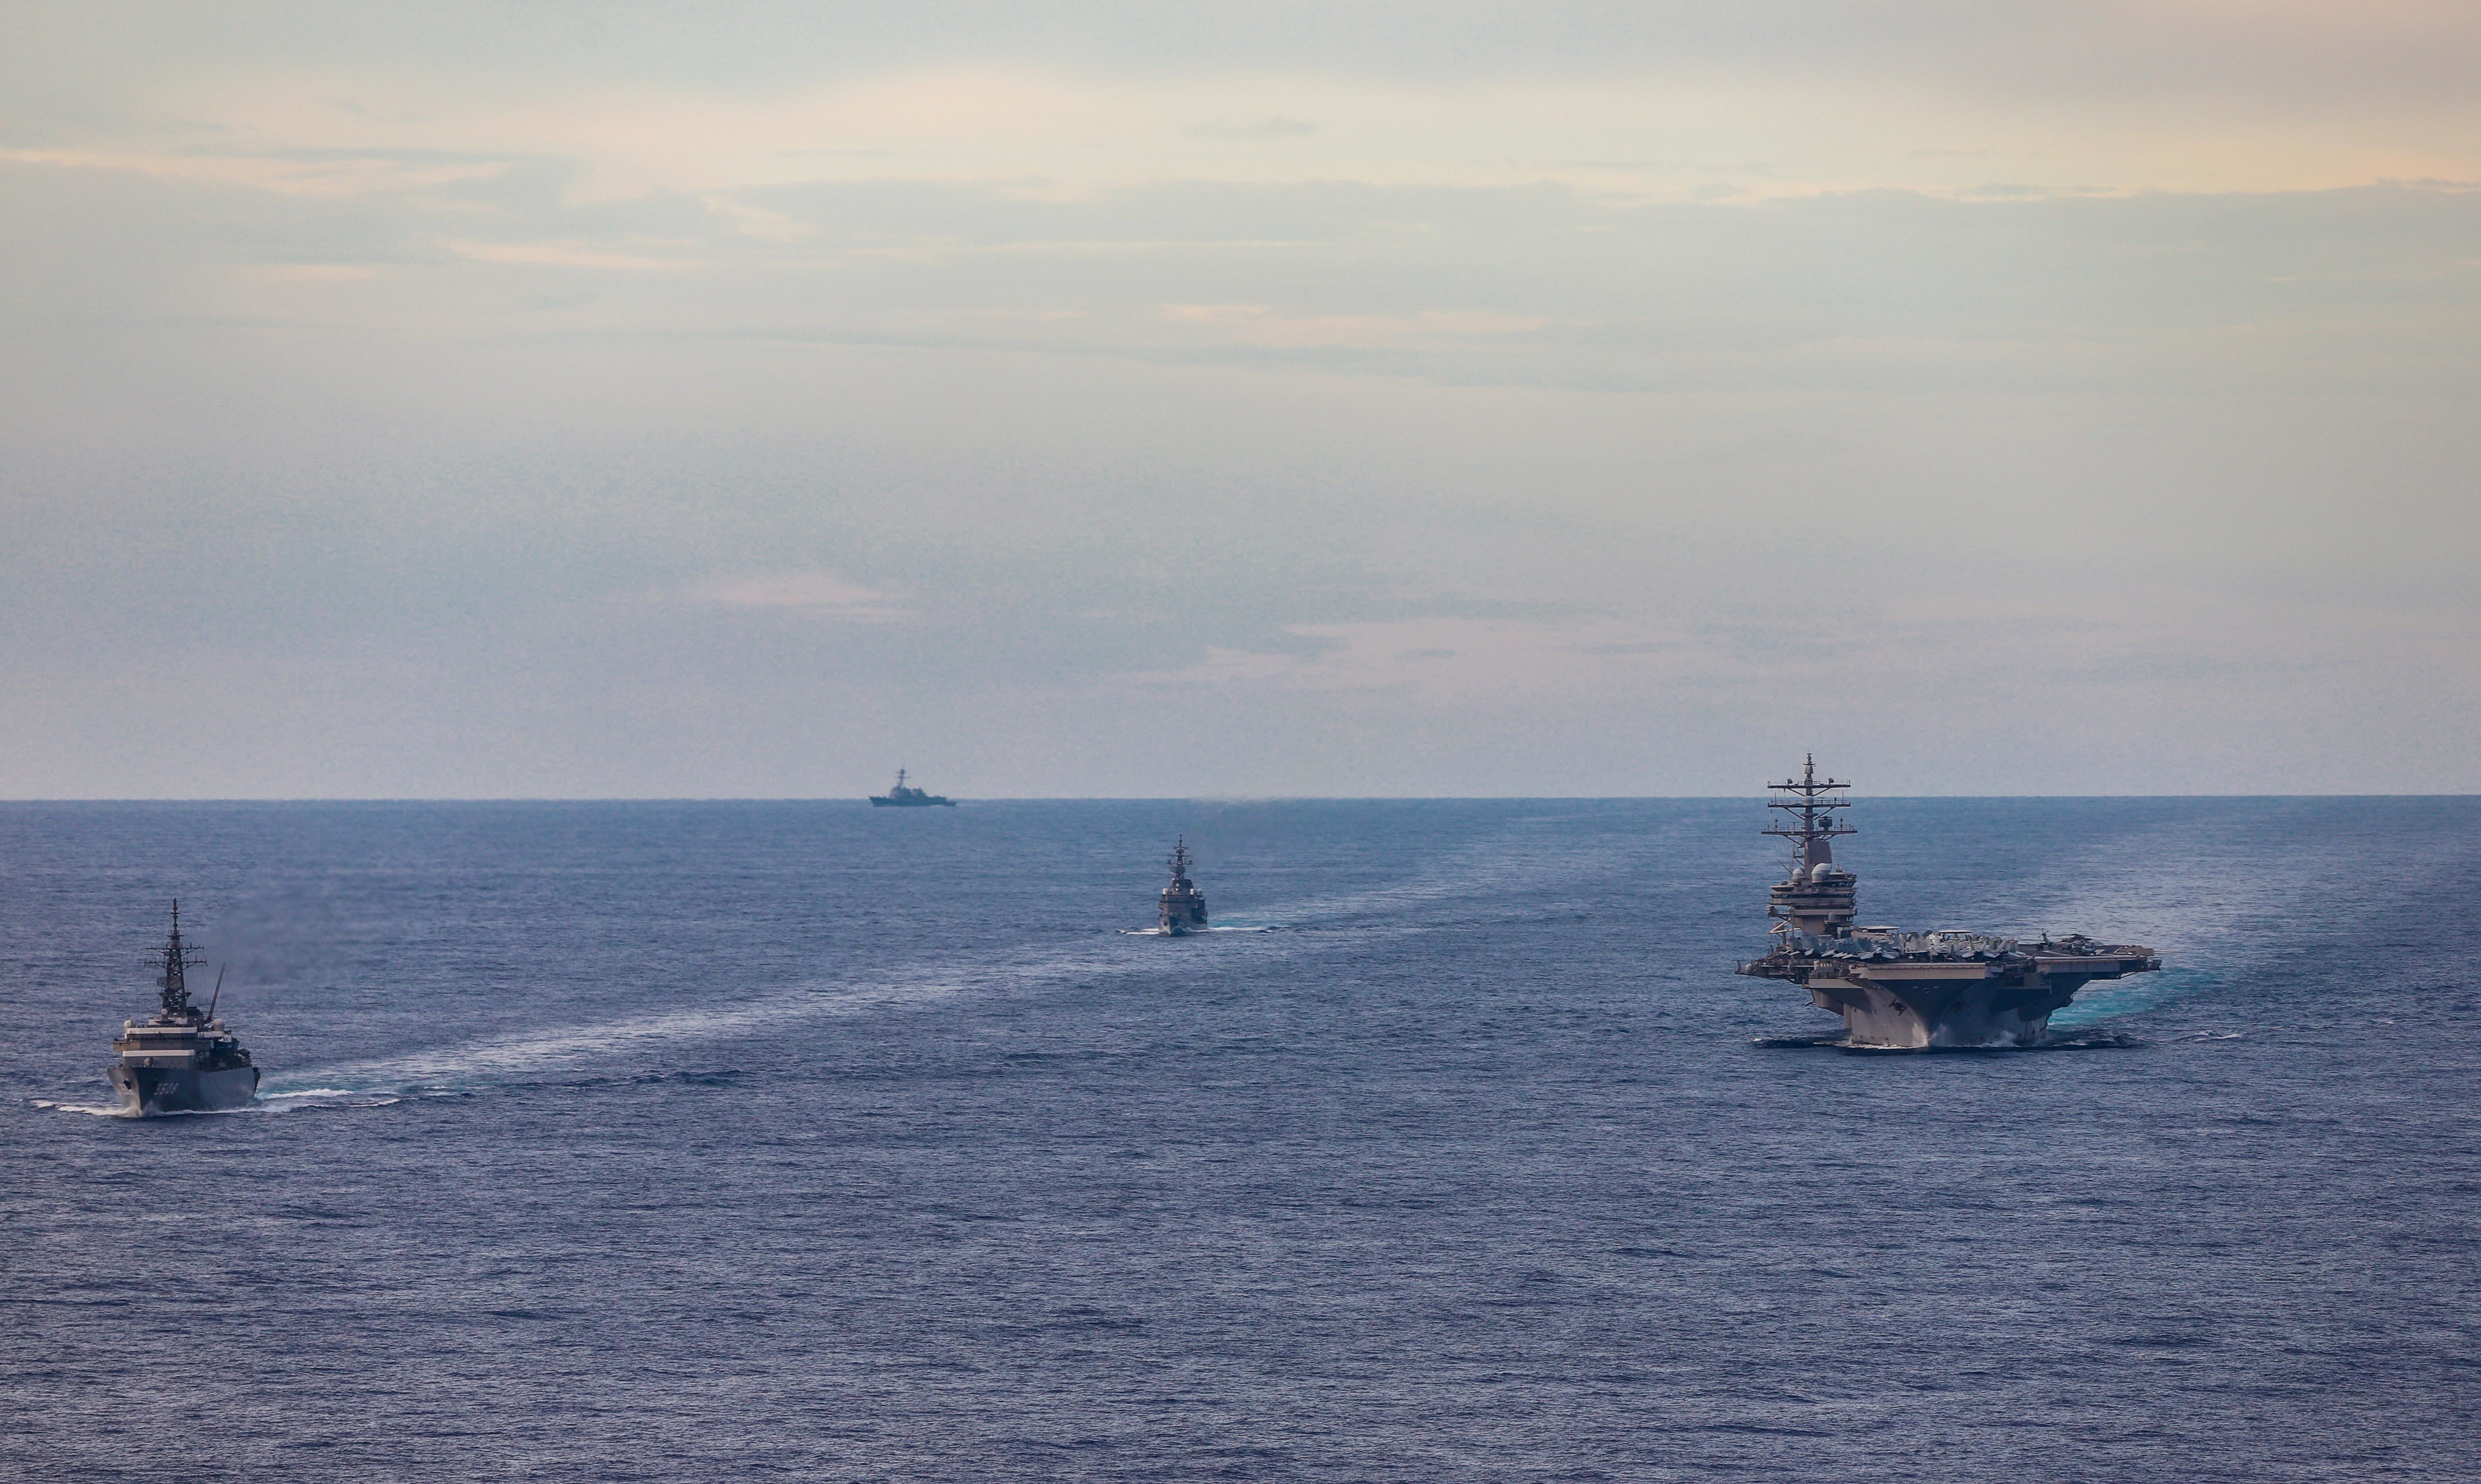 Maritime Self-Defense Force training vessels Kashima and Shimayuki conduct an exercise with the USS Ronald Reagan aircraft carrier in the South China Sea on July 7. | U.S. NAVY / VIA REUTERS